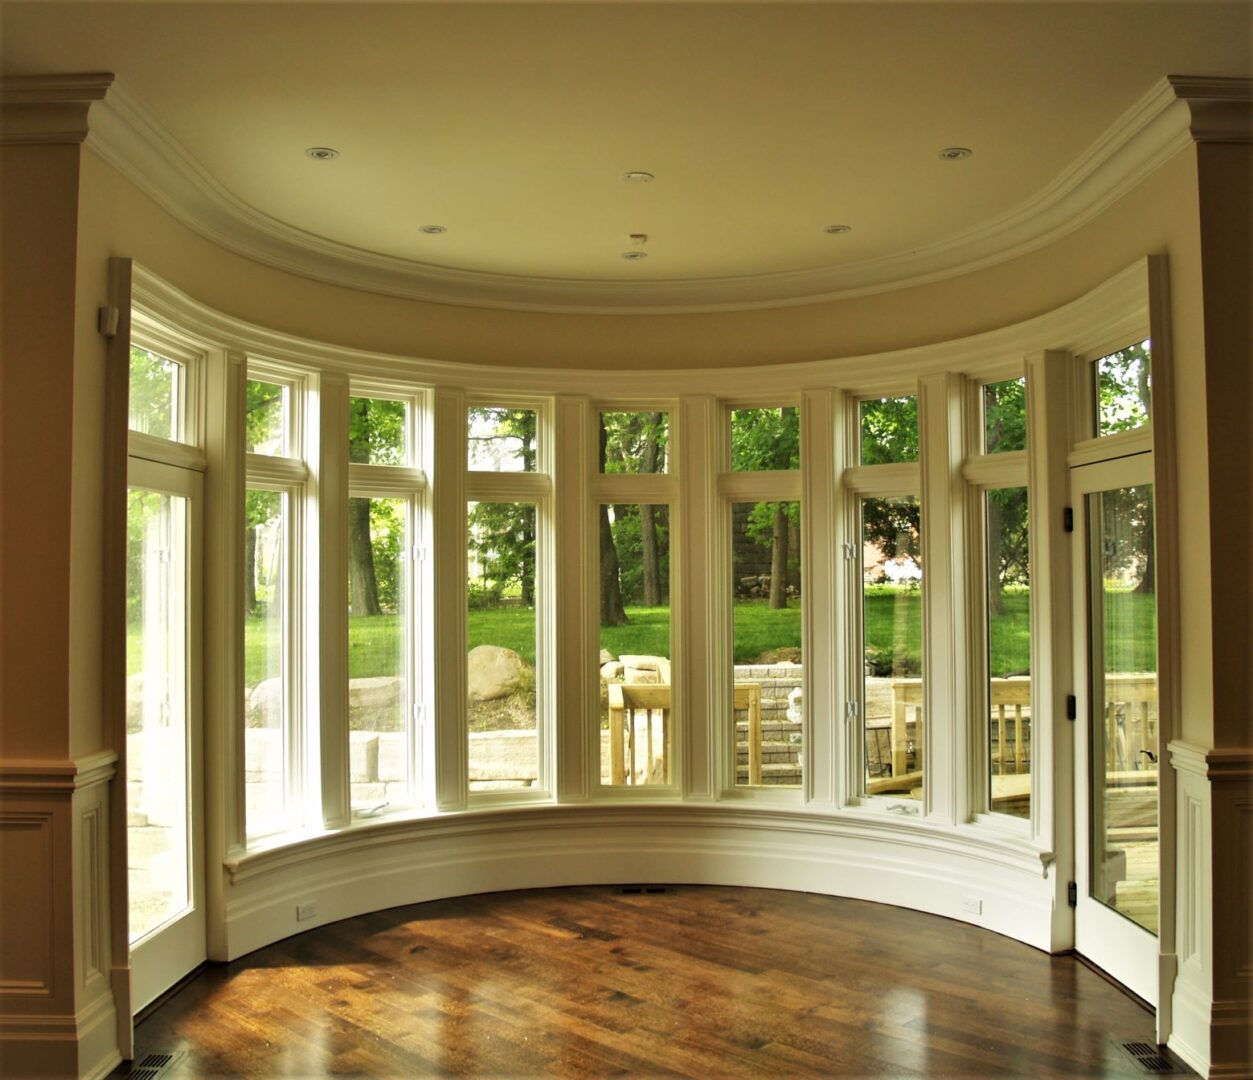 A U Shaped Window Space With Wooden Panel Flooring